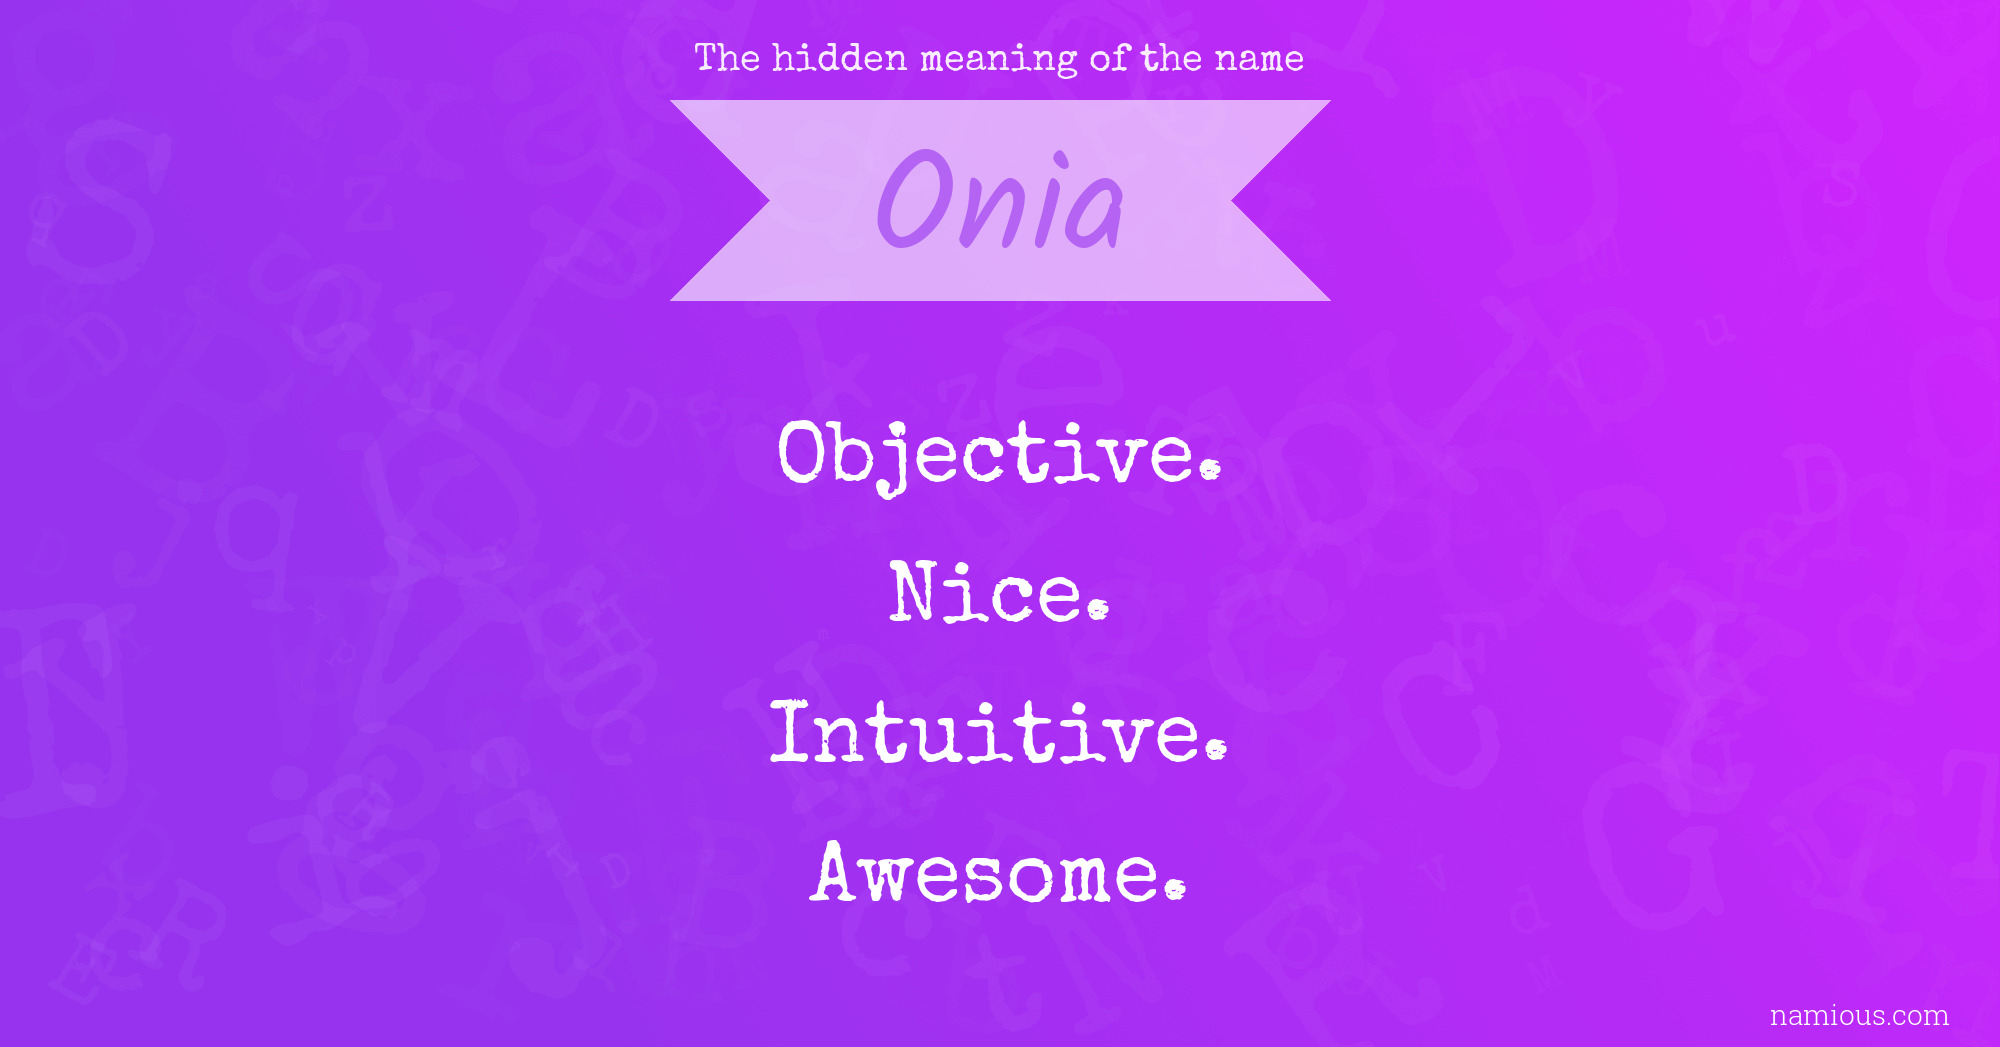 The hidden meaning of the name Onia